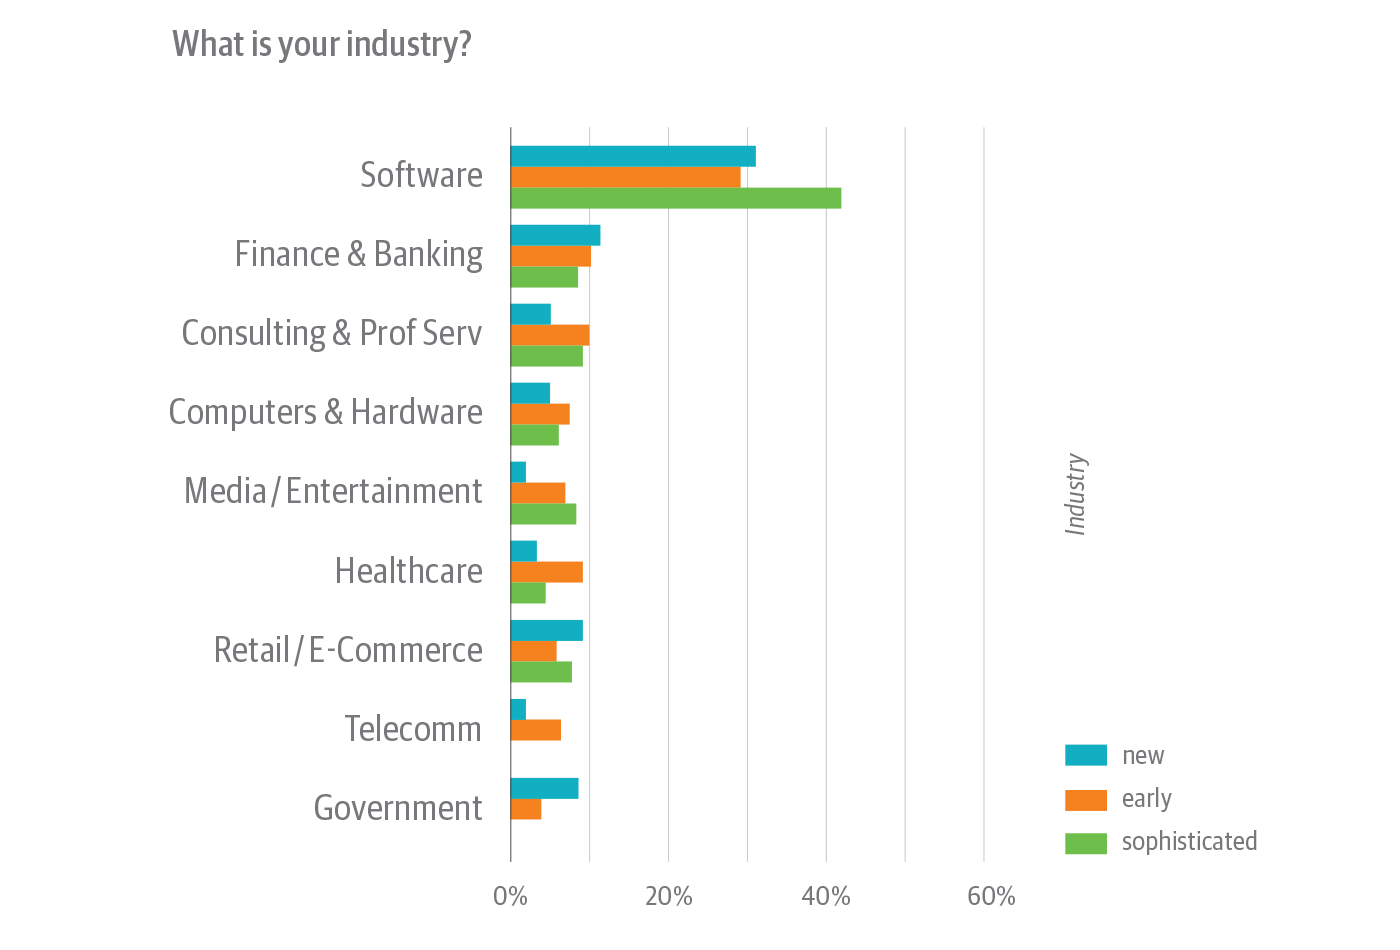 Industry of survey respondents, broken down by cloud native experience level